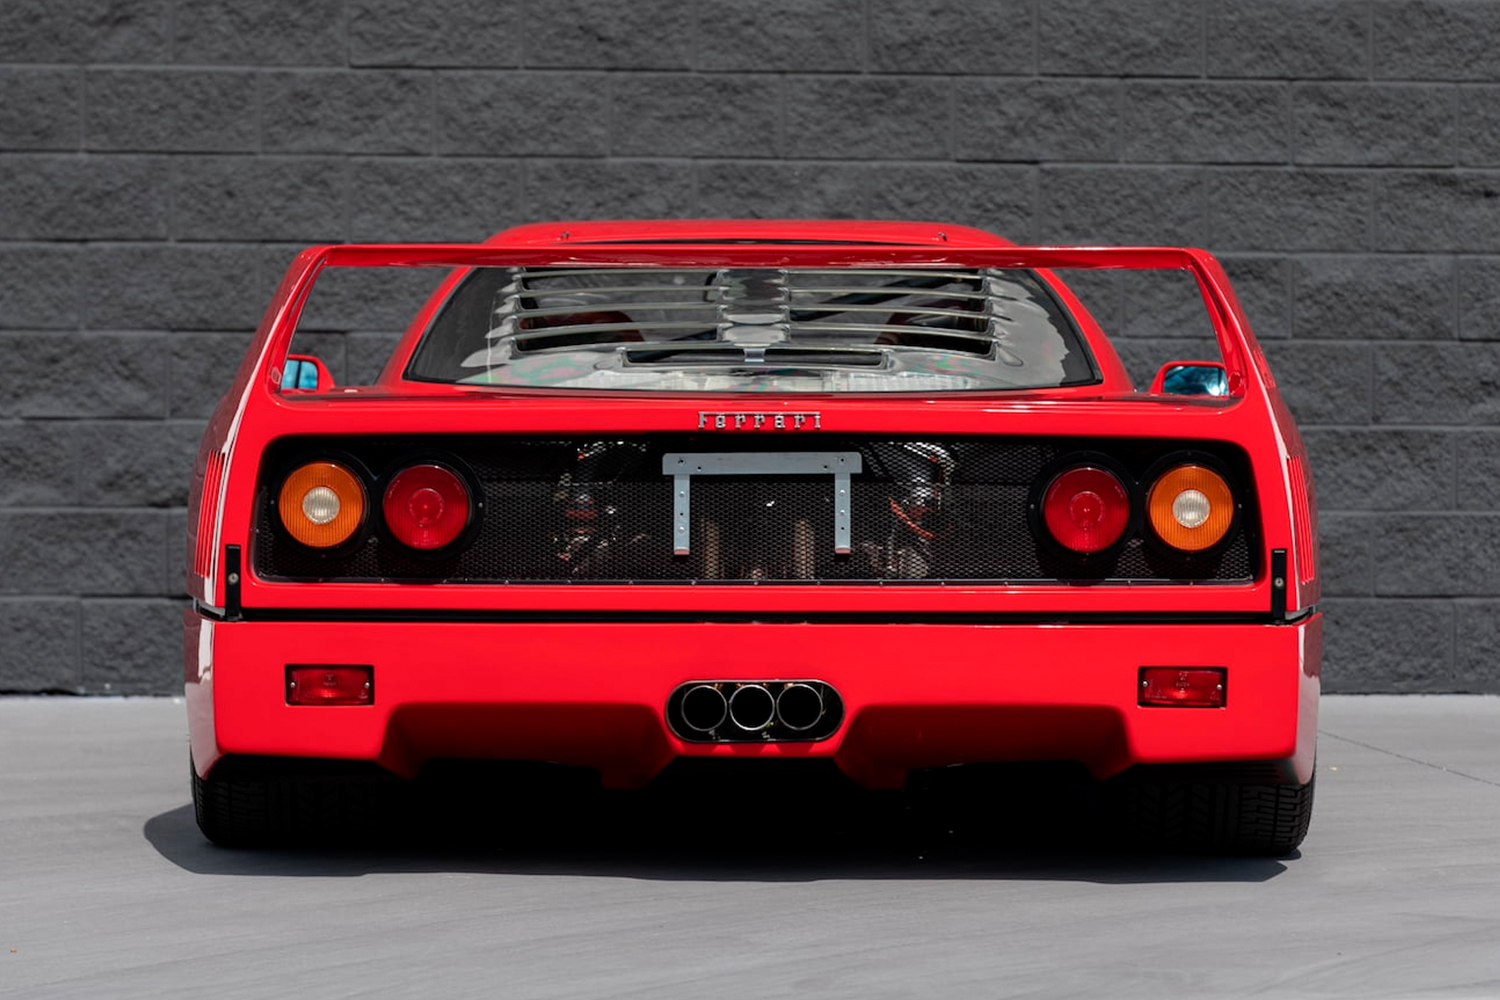 The rear end of a 1992 Ferrari F40 sports car in red (Rosso Corsa) that's up for auction at the Mecum Auctions Kissimmee, Florida sale in January 2022